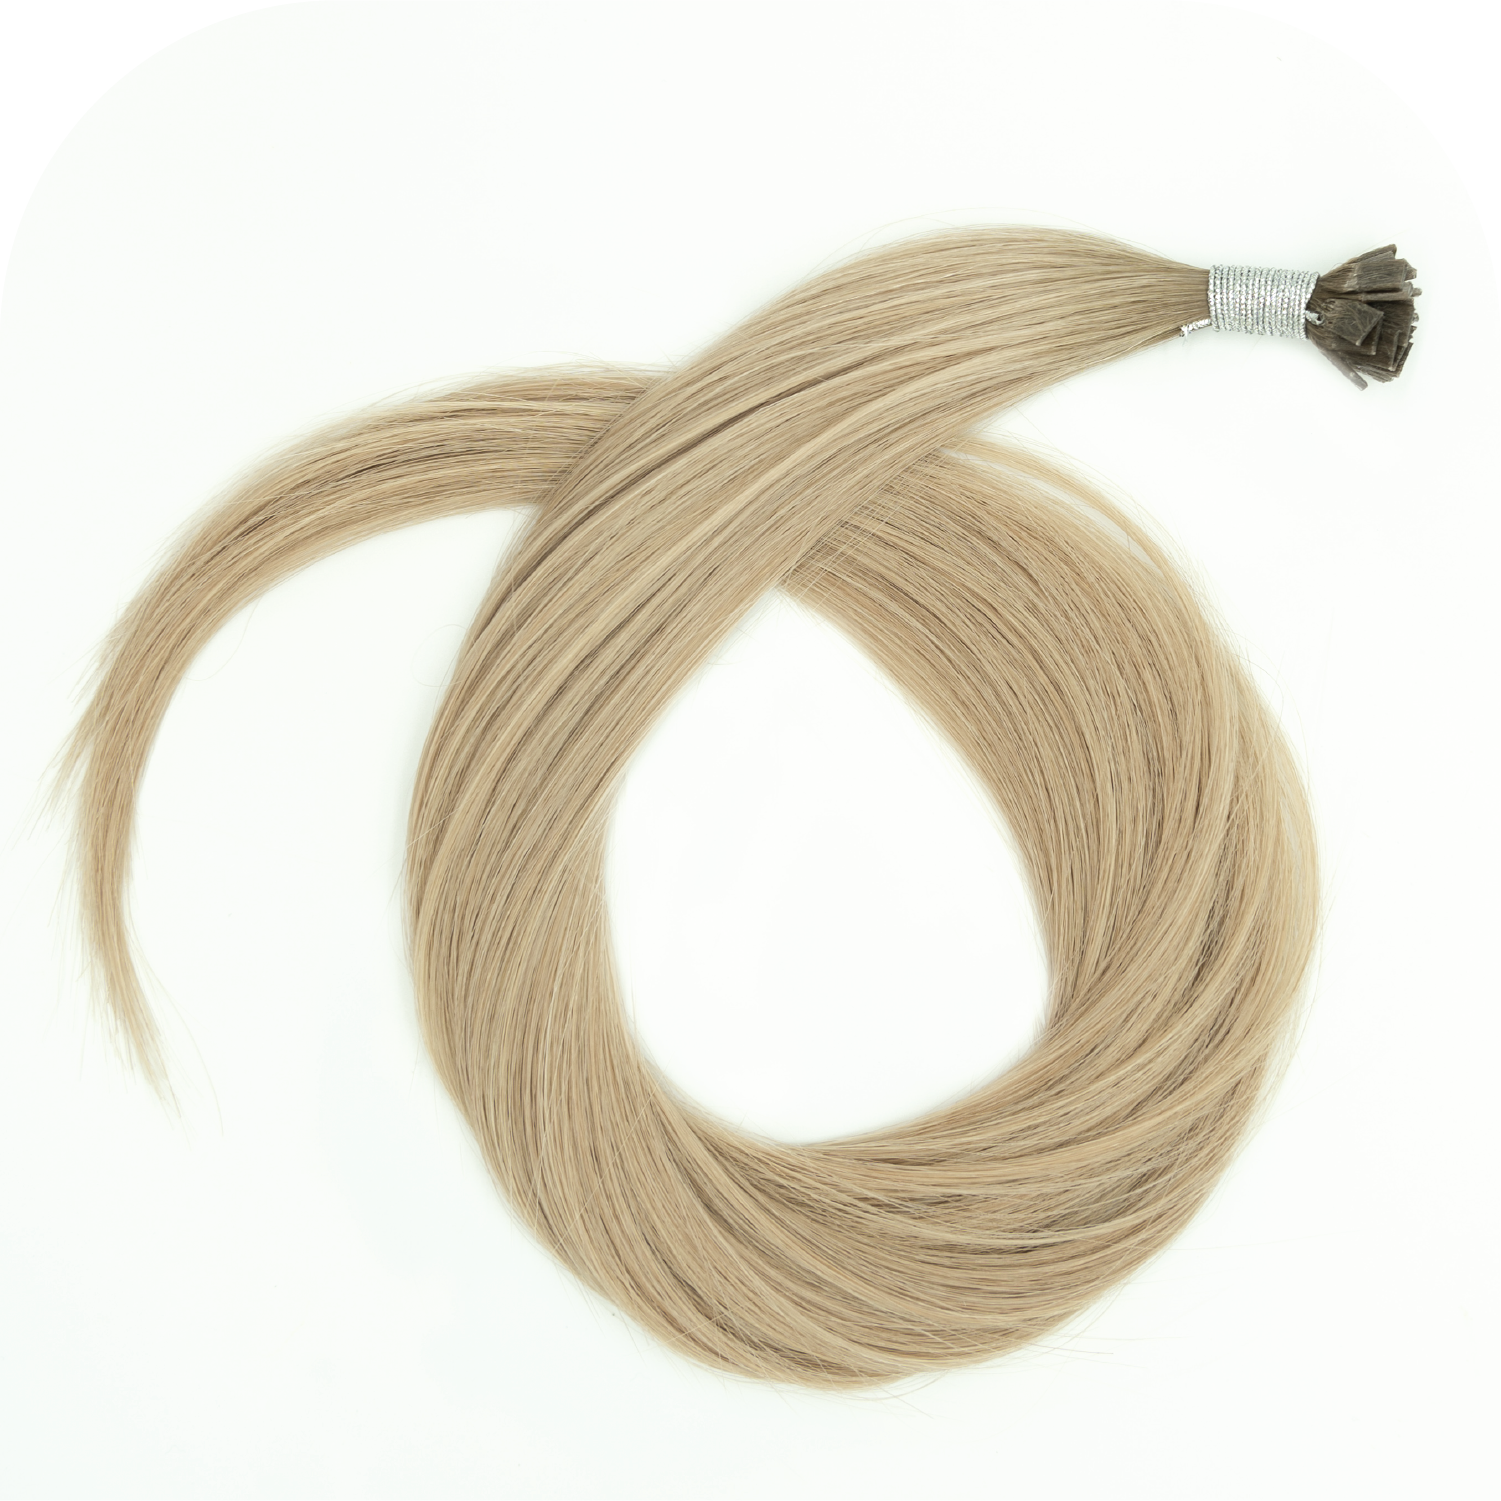 Couture Hair Co. Couture Tip or K Tip Hair Extension in Color Toasted Almond 